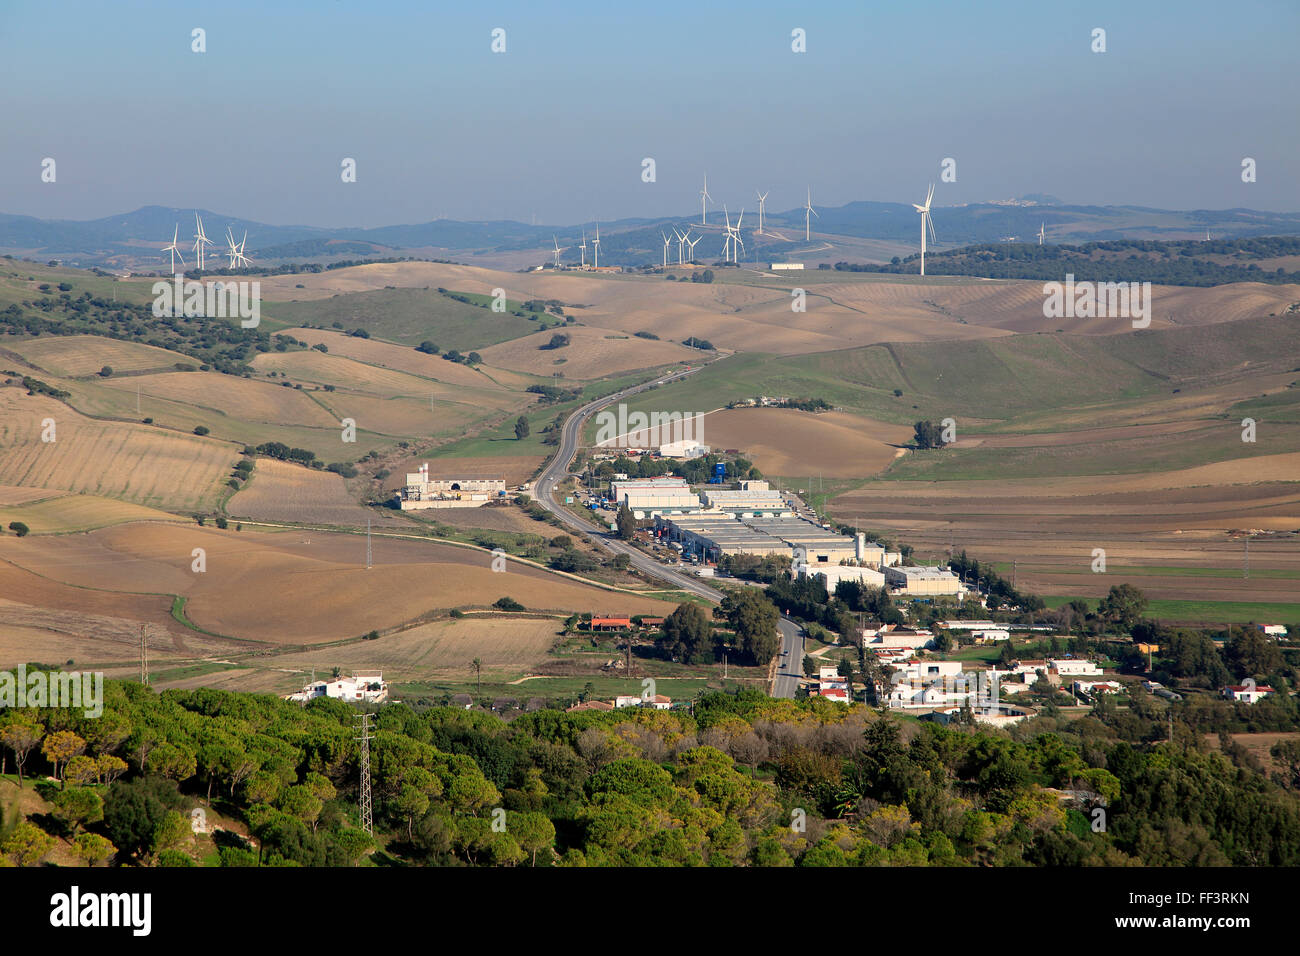 View over countryside and wind turbines from Vejer de la Frontera, Cadiz province, Spain Stock Photo